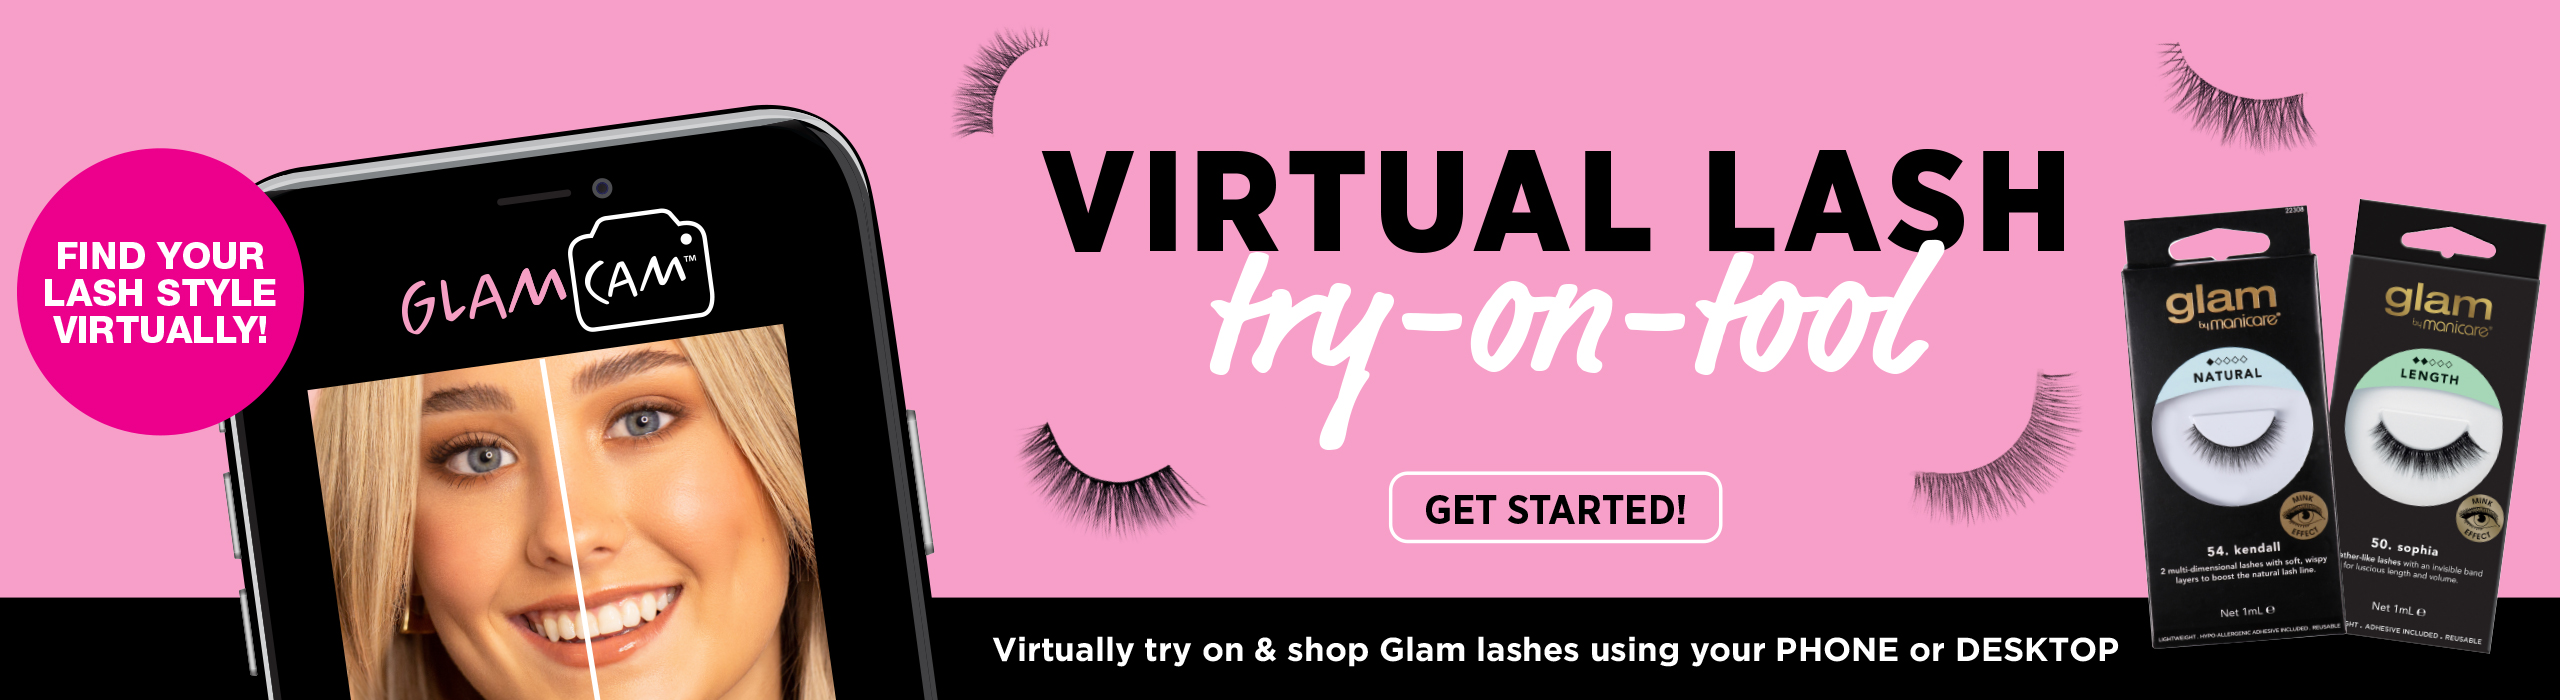 Virtual Lash Try-On-Tool. Find your Glam lash style virtually!